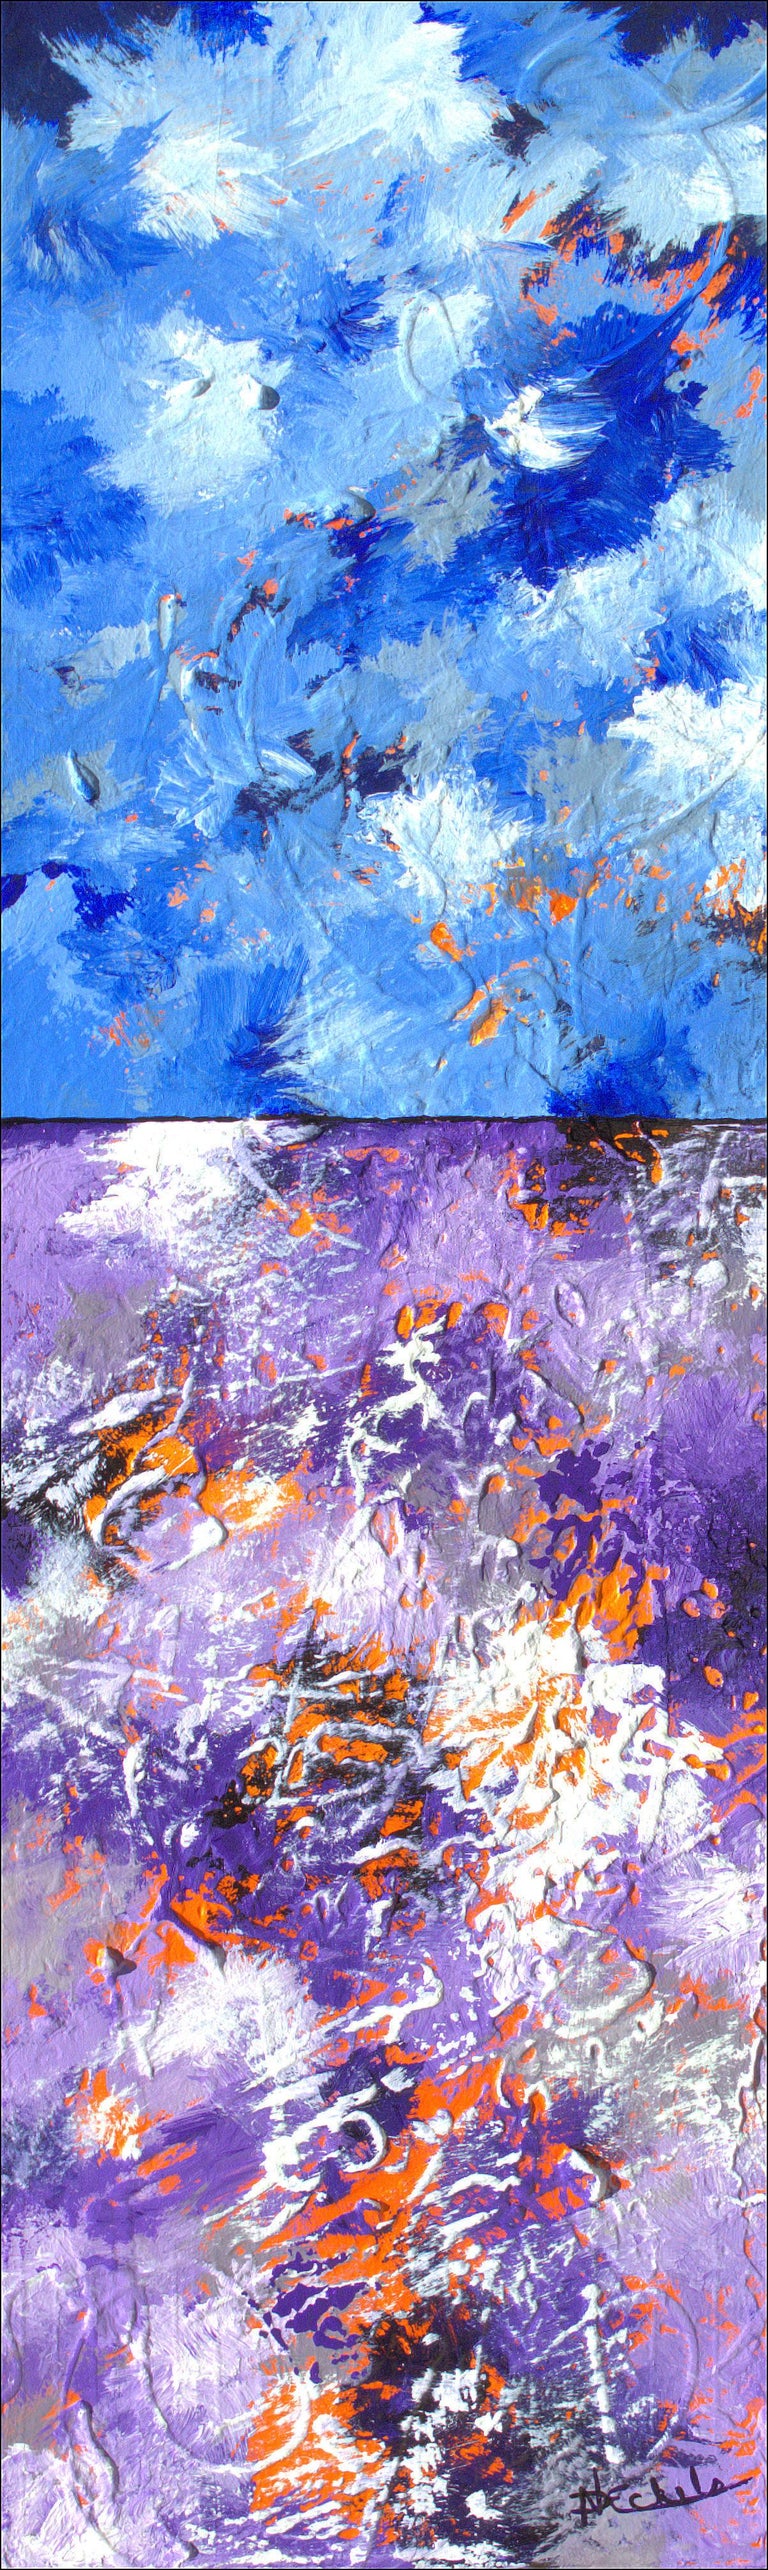 Nancy Eckels Abstract Painting - "Softer Thoughts" Mixed Media abstract with textural blues, lavender, and white